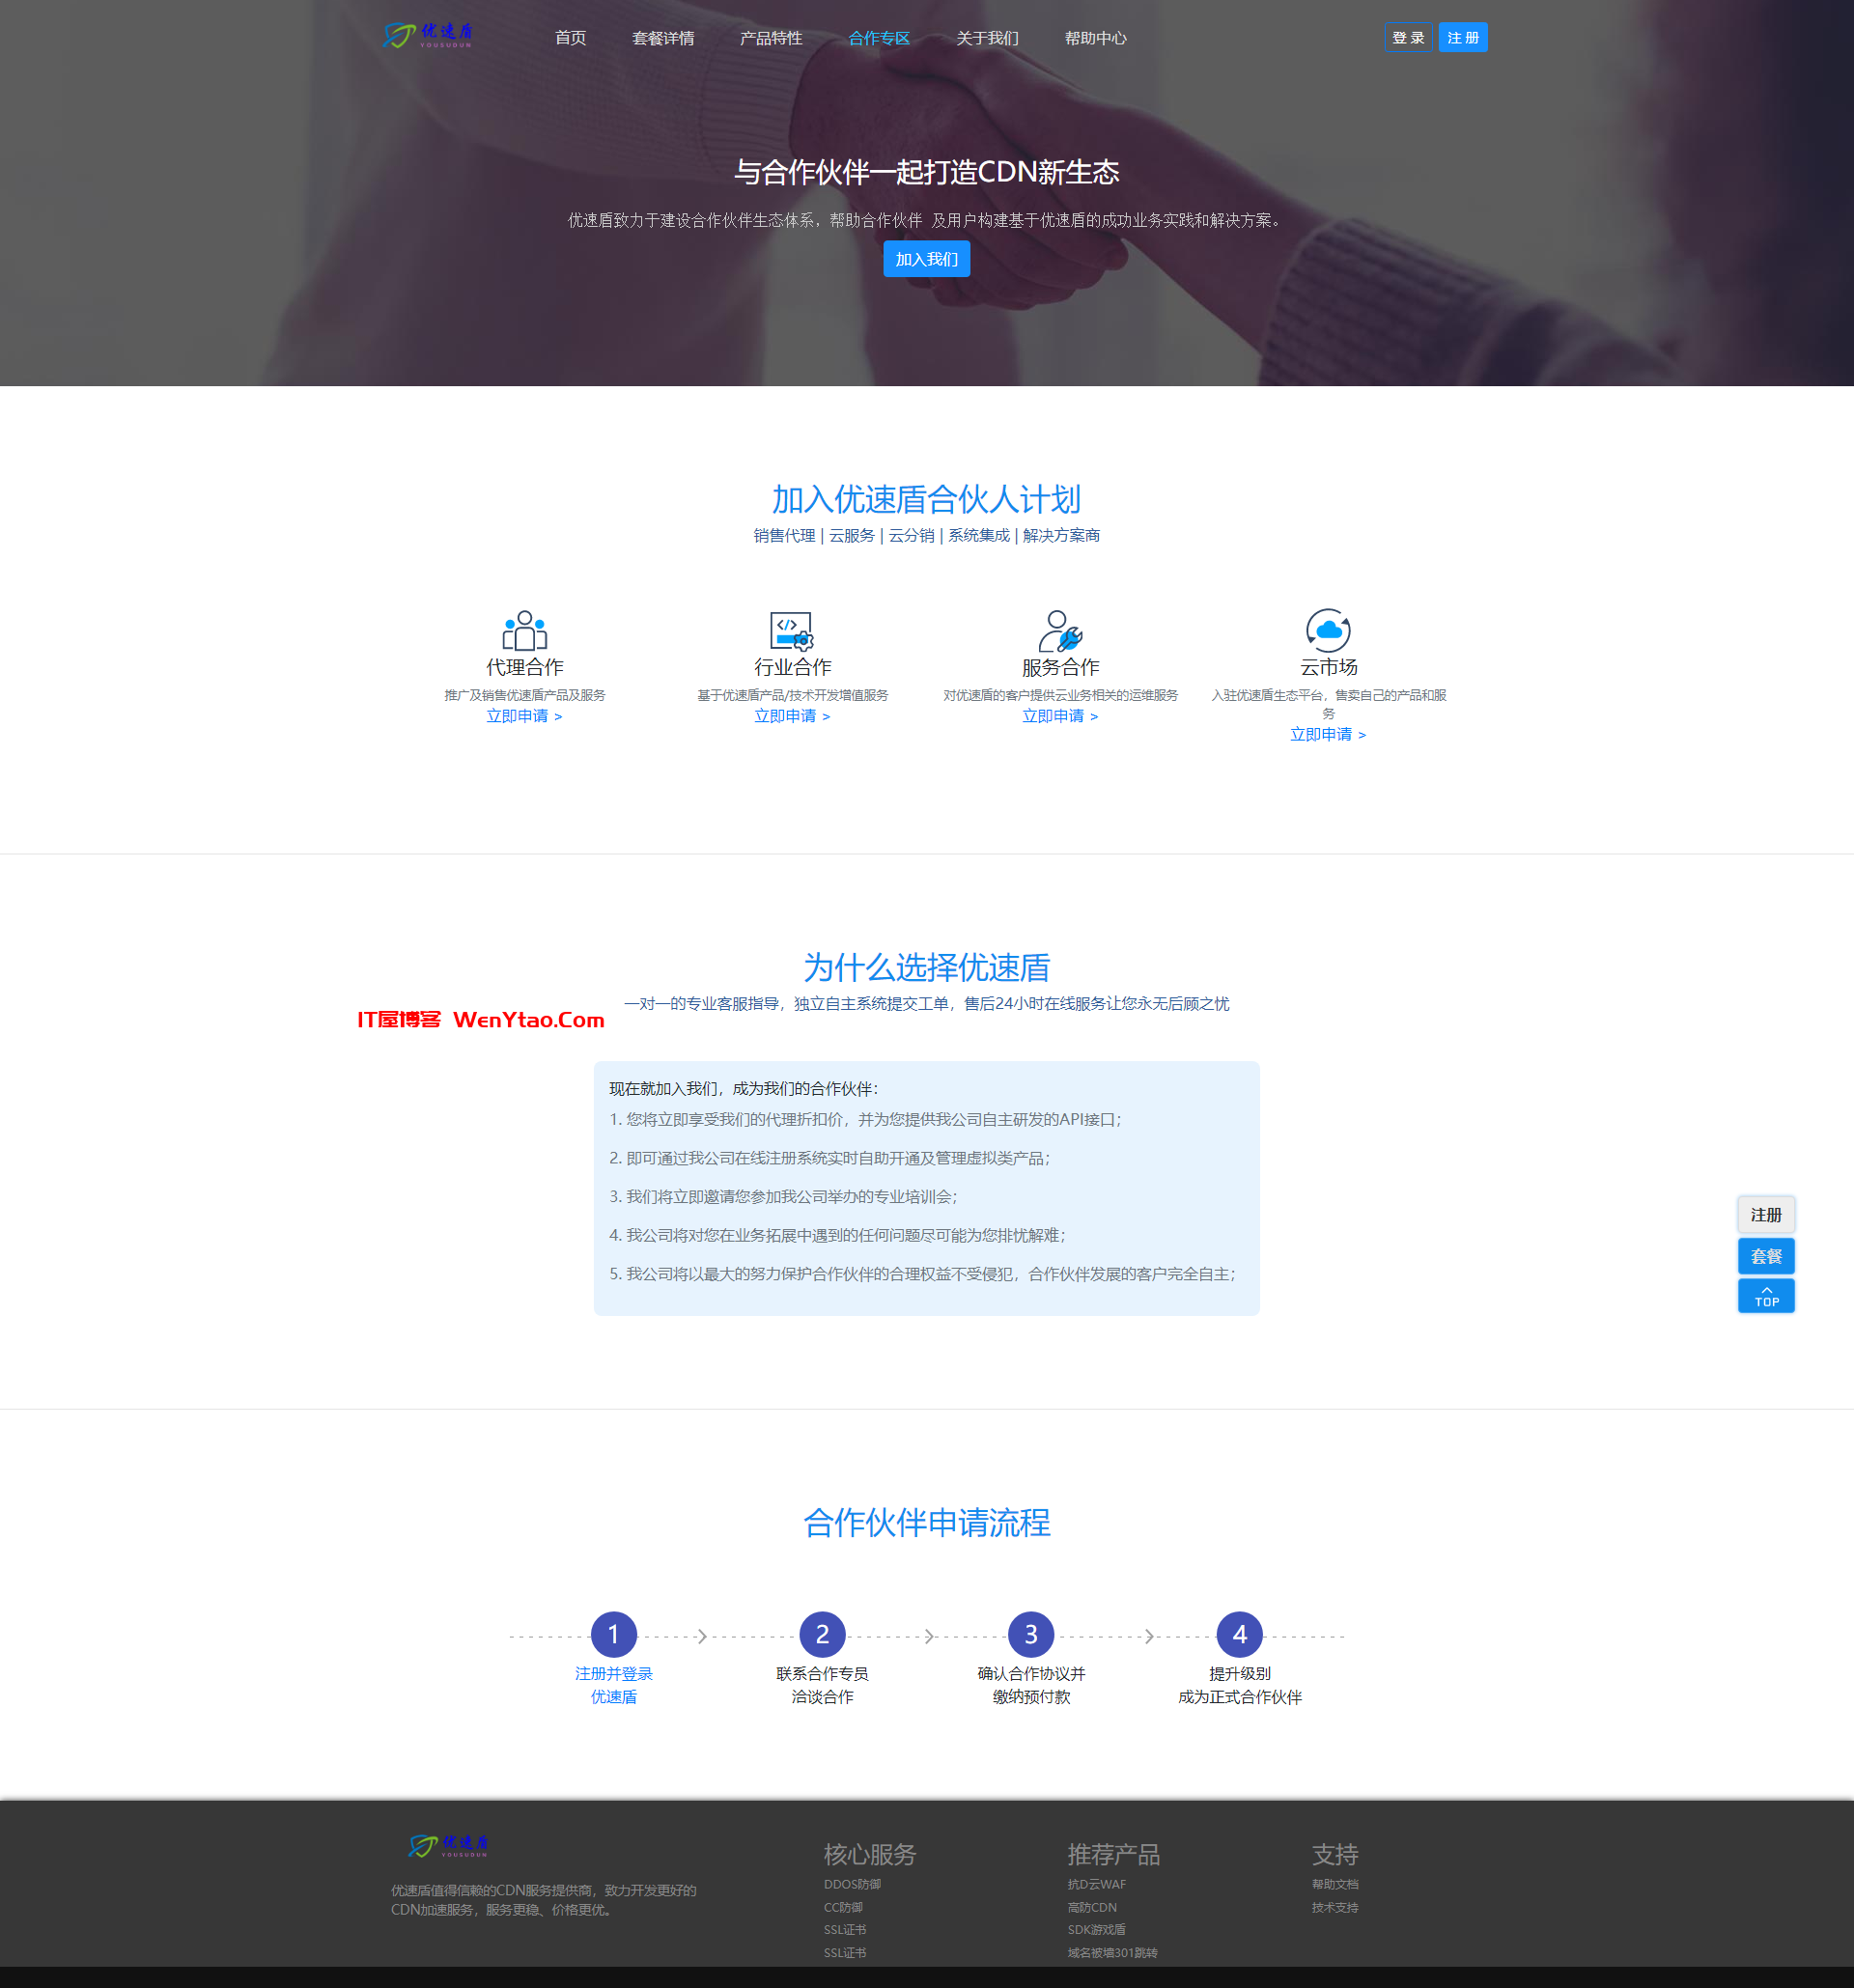  Yousudun CDN official website template CDN official website template CDNFLY official website template with package details page effect comparison before and after using CDN dynamic page networknbsp template CDN address official website page 4